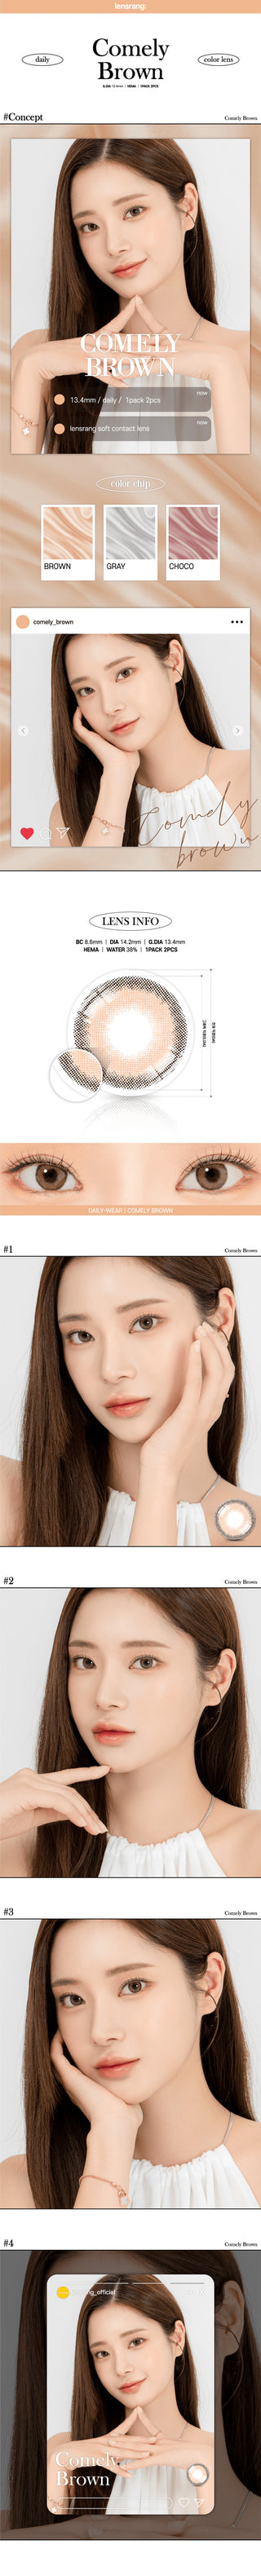 Lensrang Comely Brown Color Contact Lens - EyeCandys